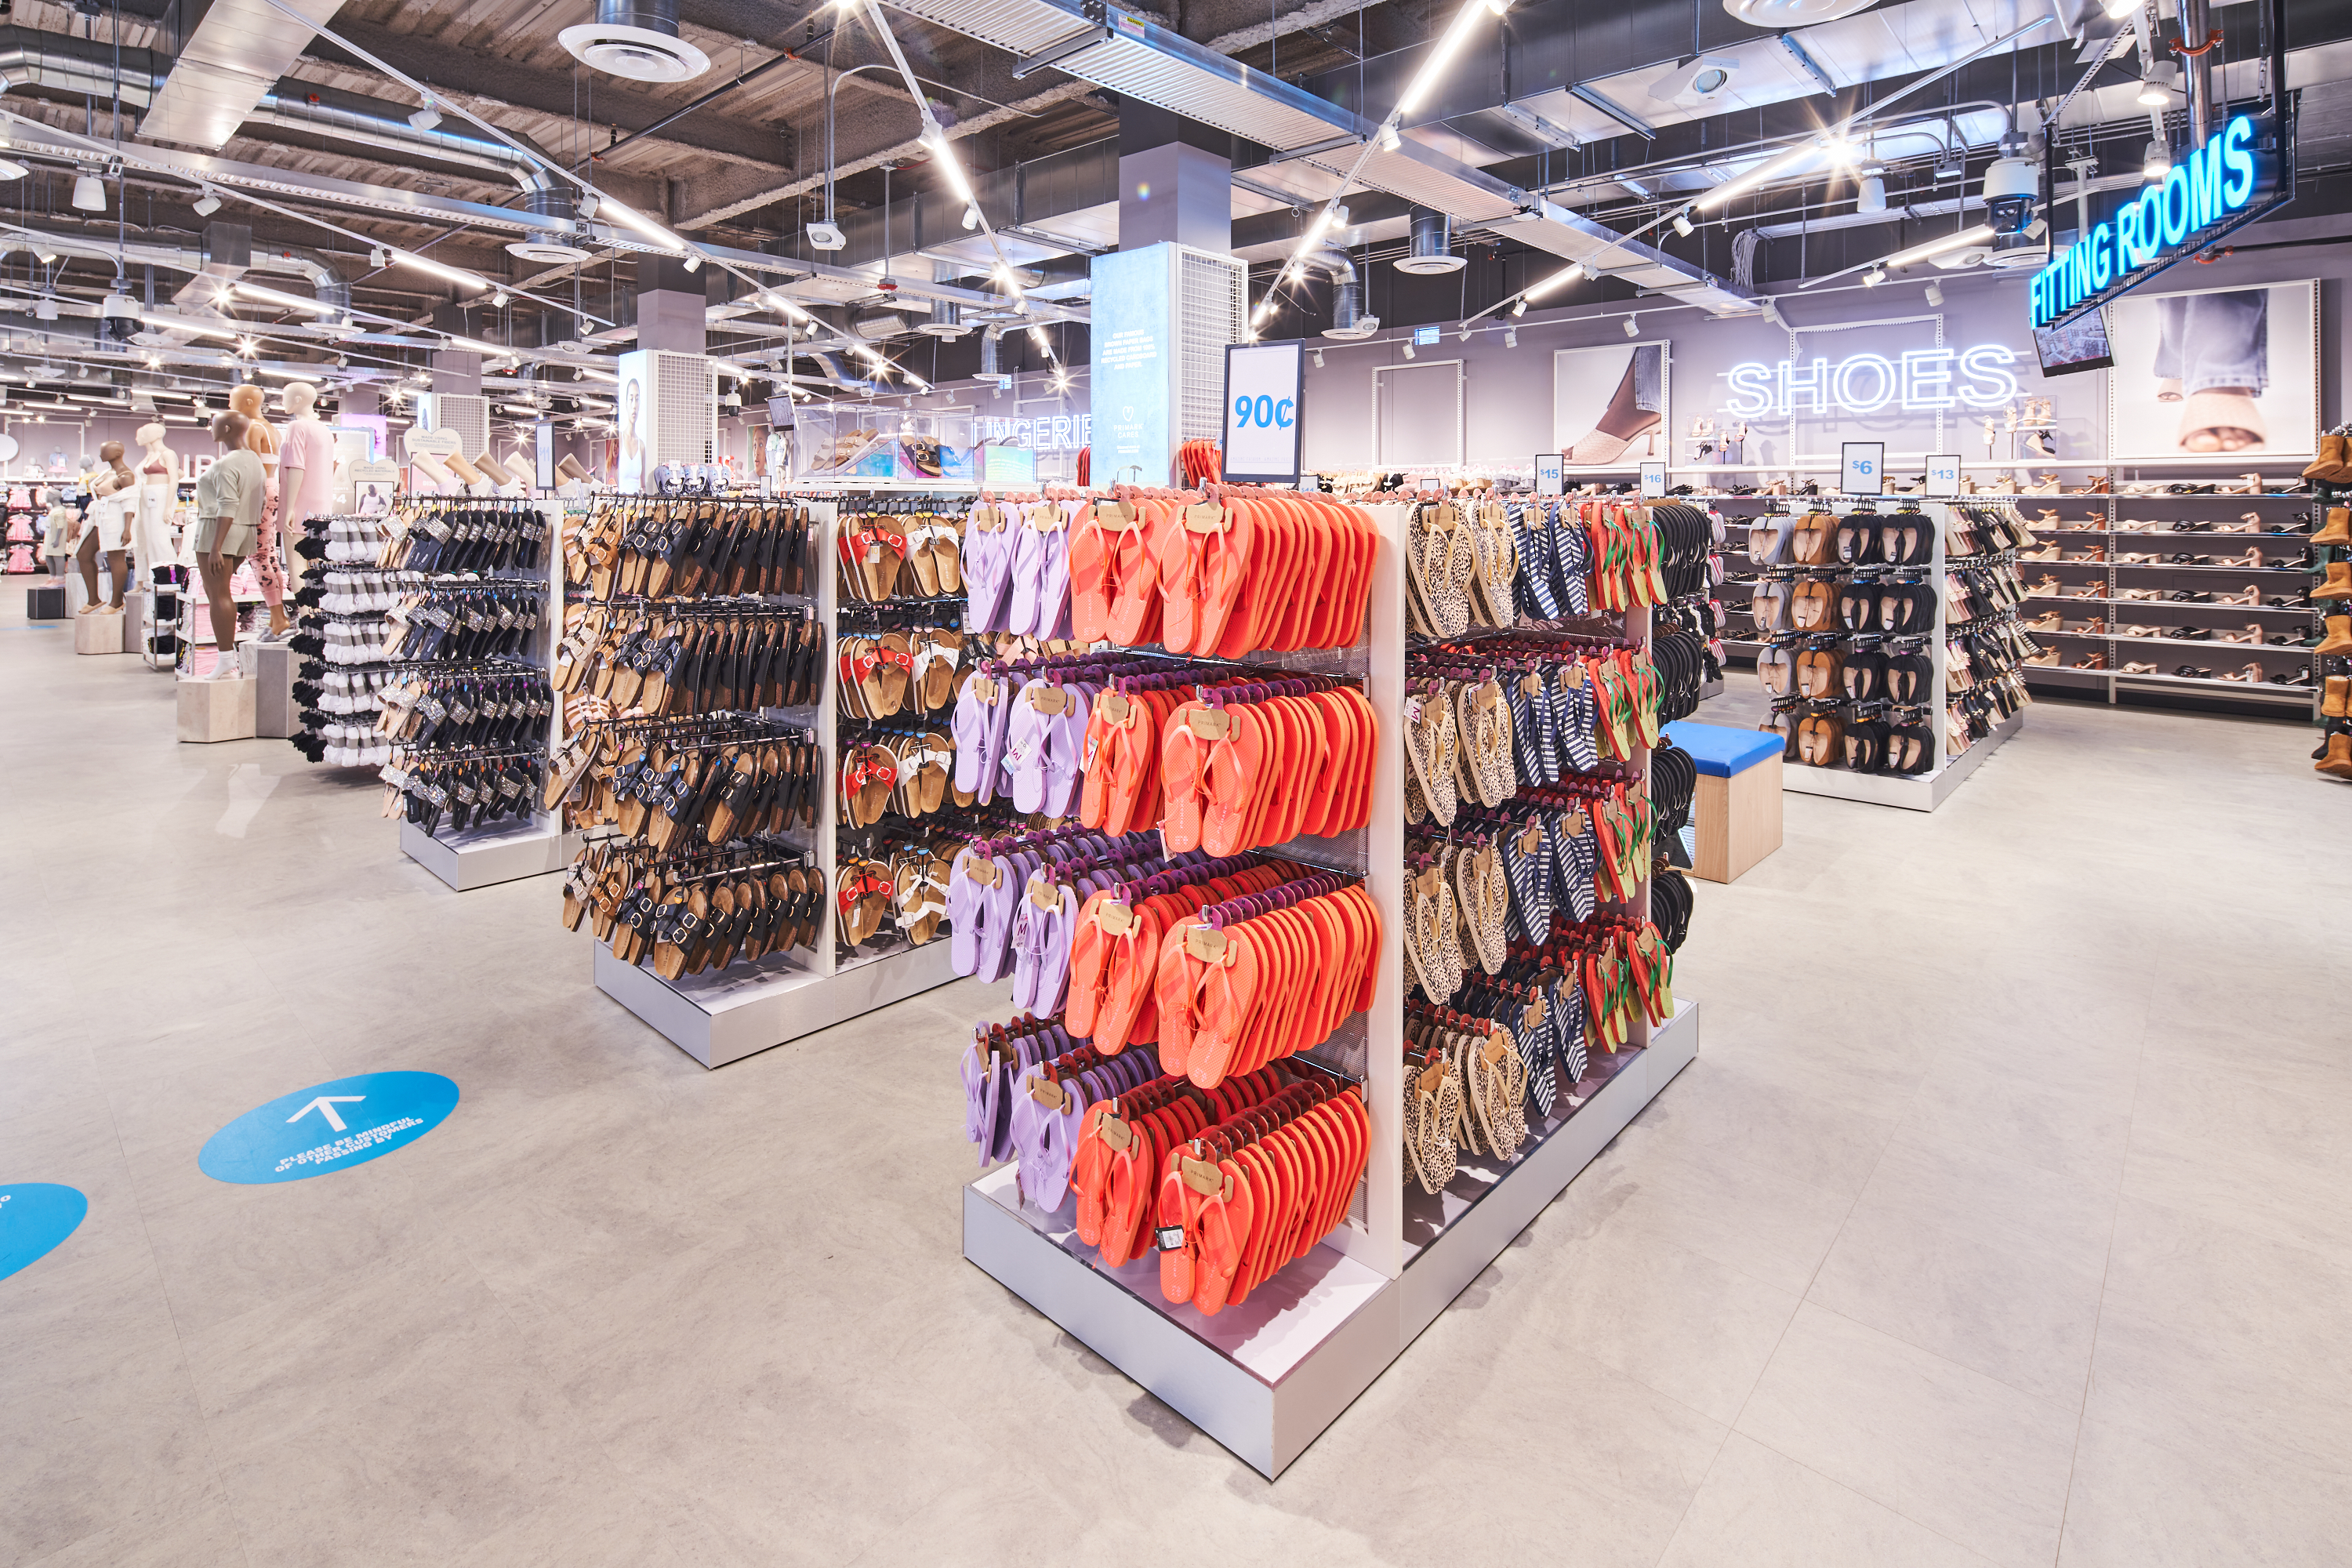 Take a Peek Inside Primark's 3-Level Store in Chicago – Visual